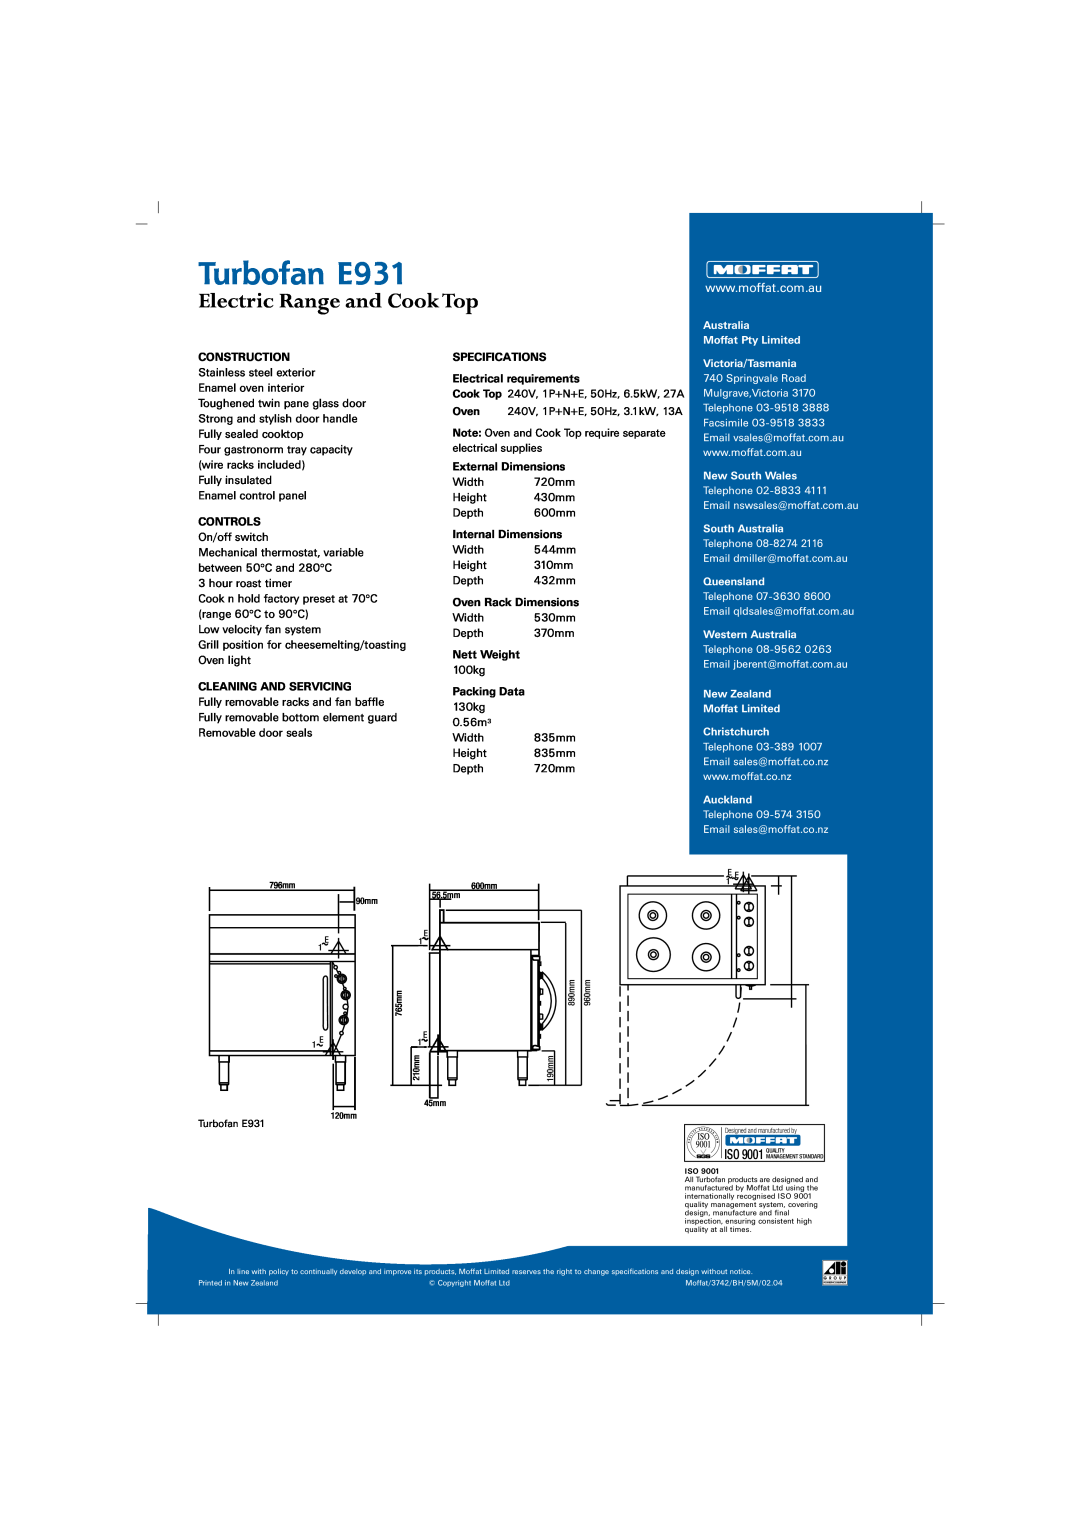 Moffat Turbofan E931, Electric Range and Cook Top, ISO 9001 QUALITY, Construction, Controls, Cleaning And Servicing 